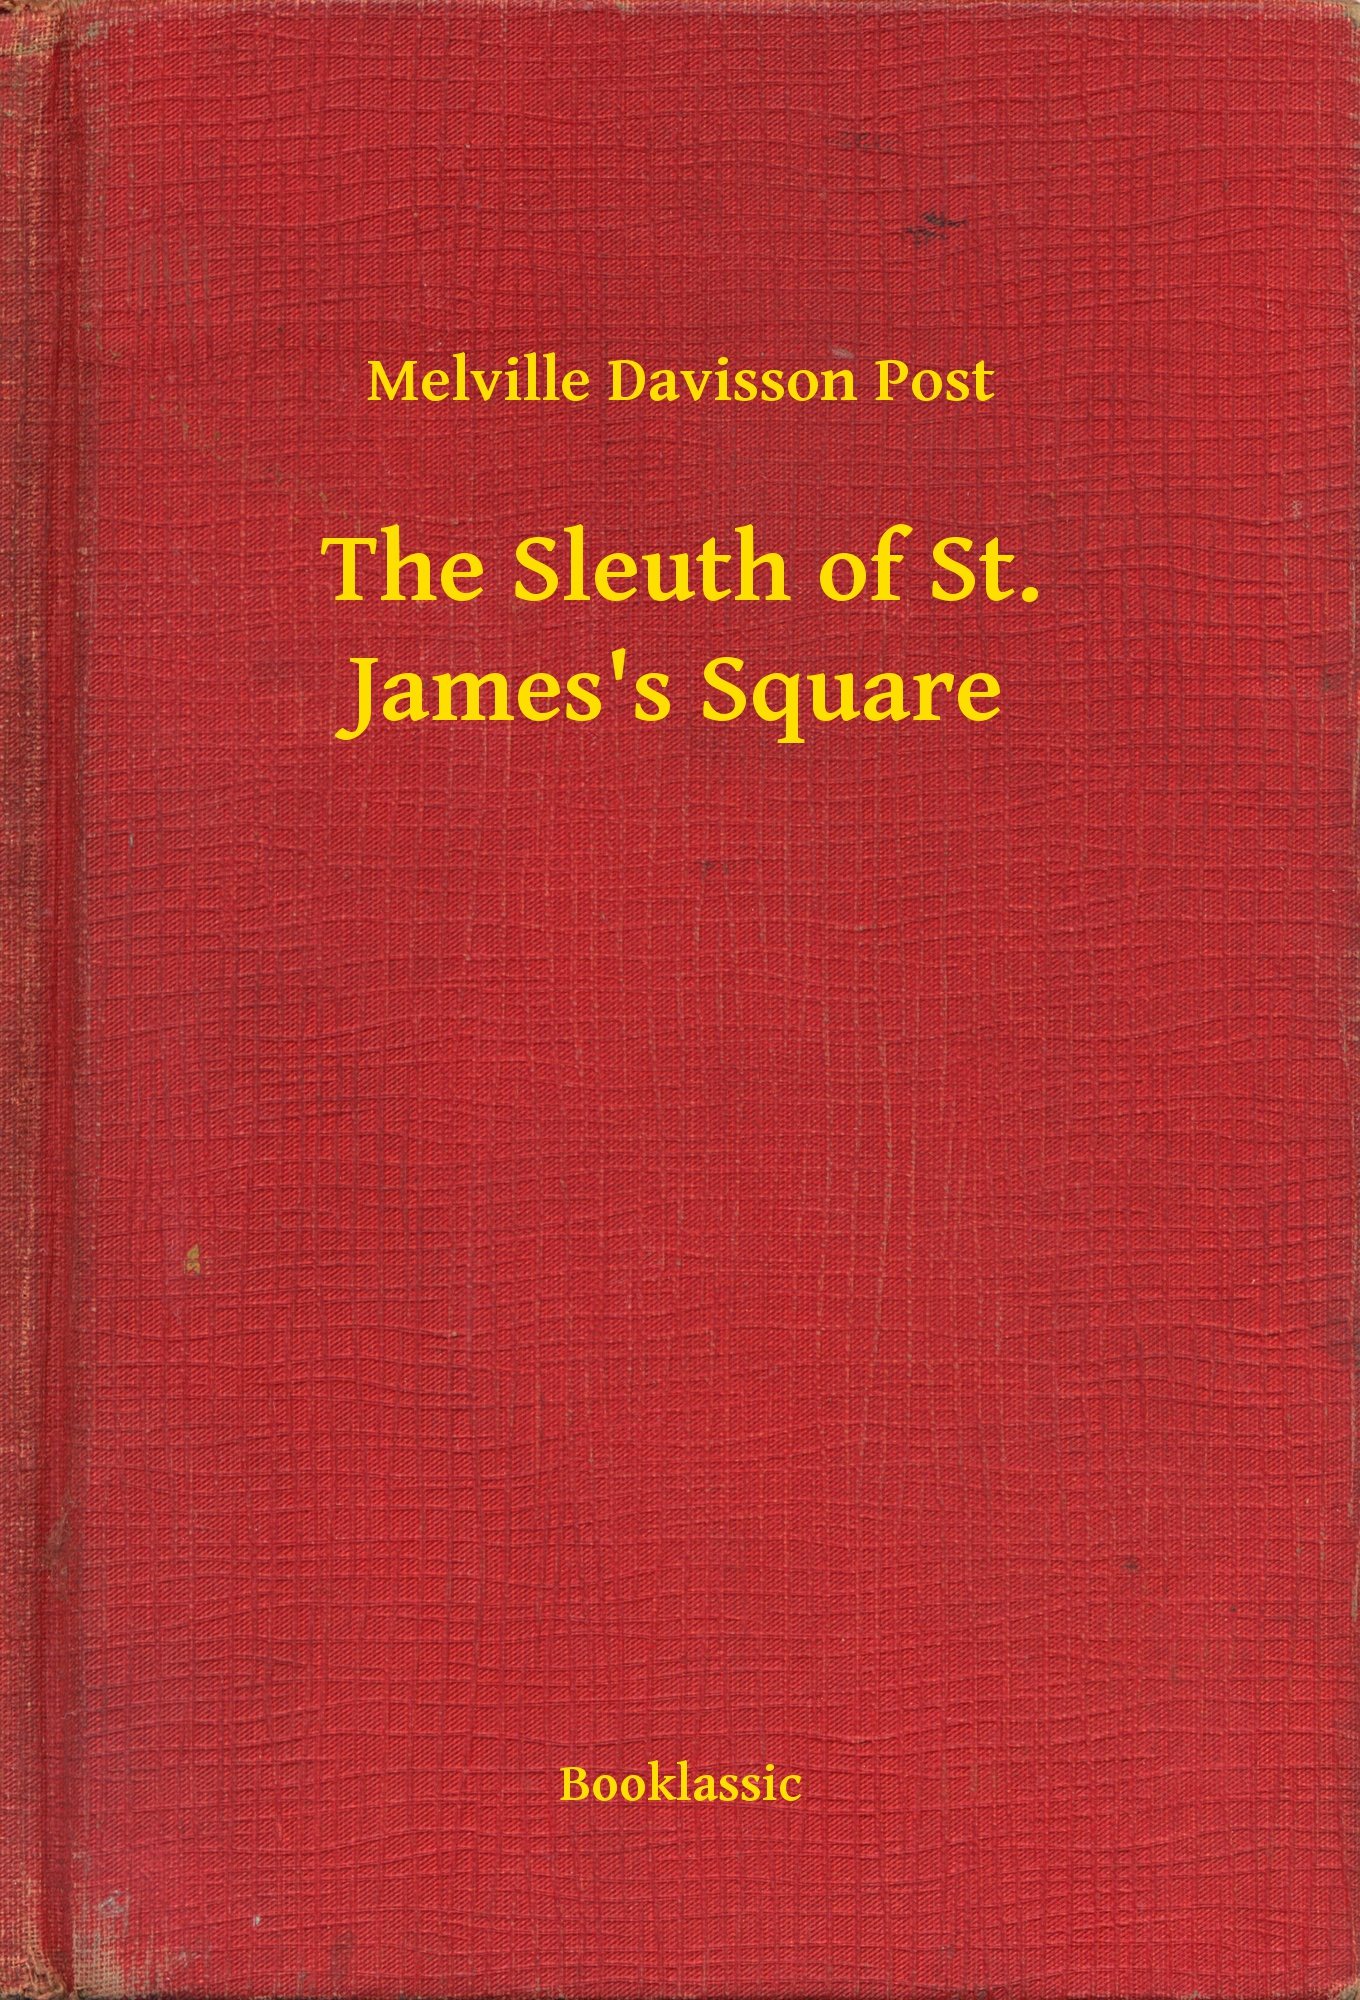 The Sleuth of St. James"s Square